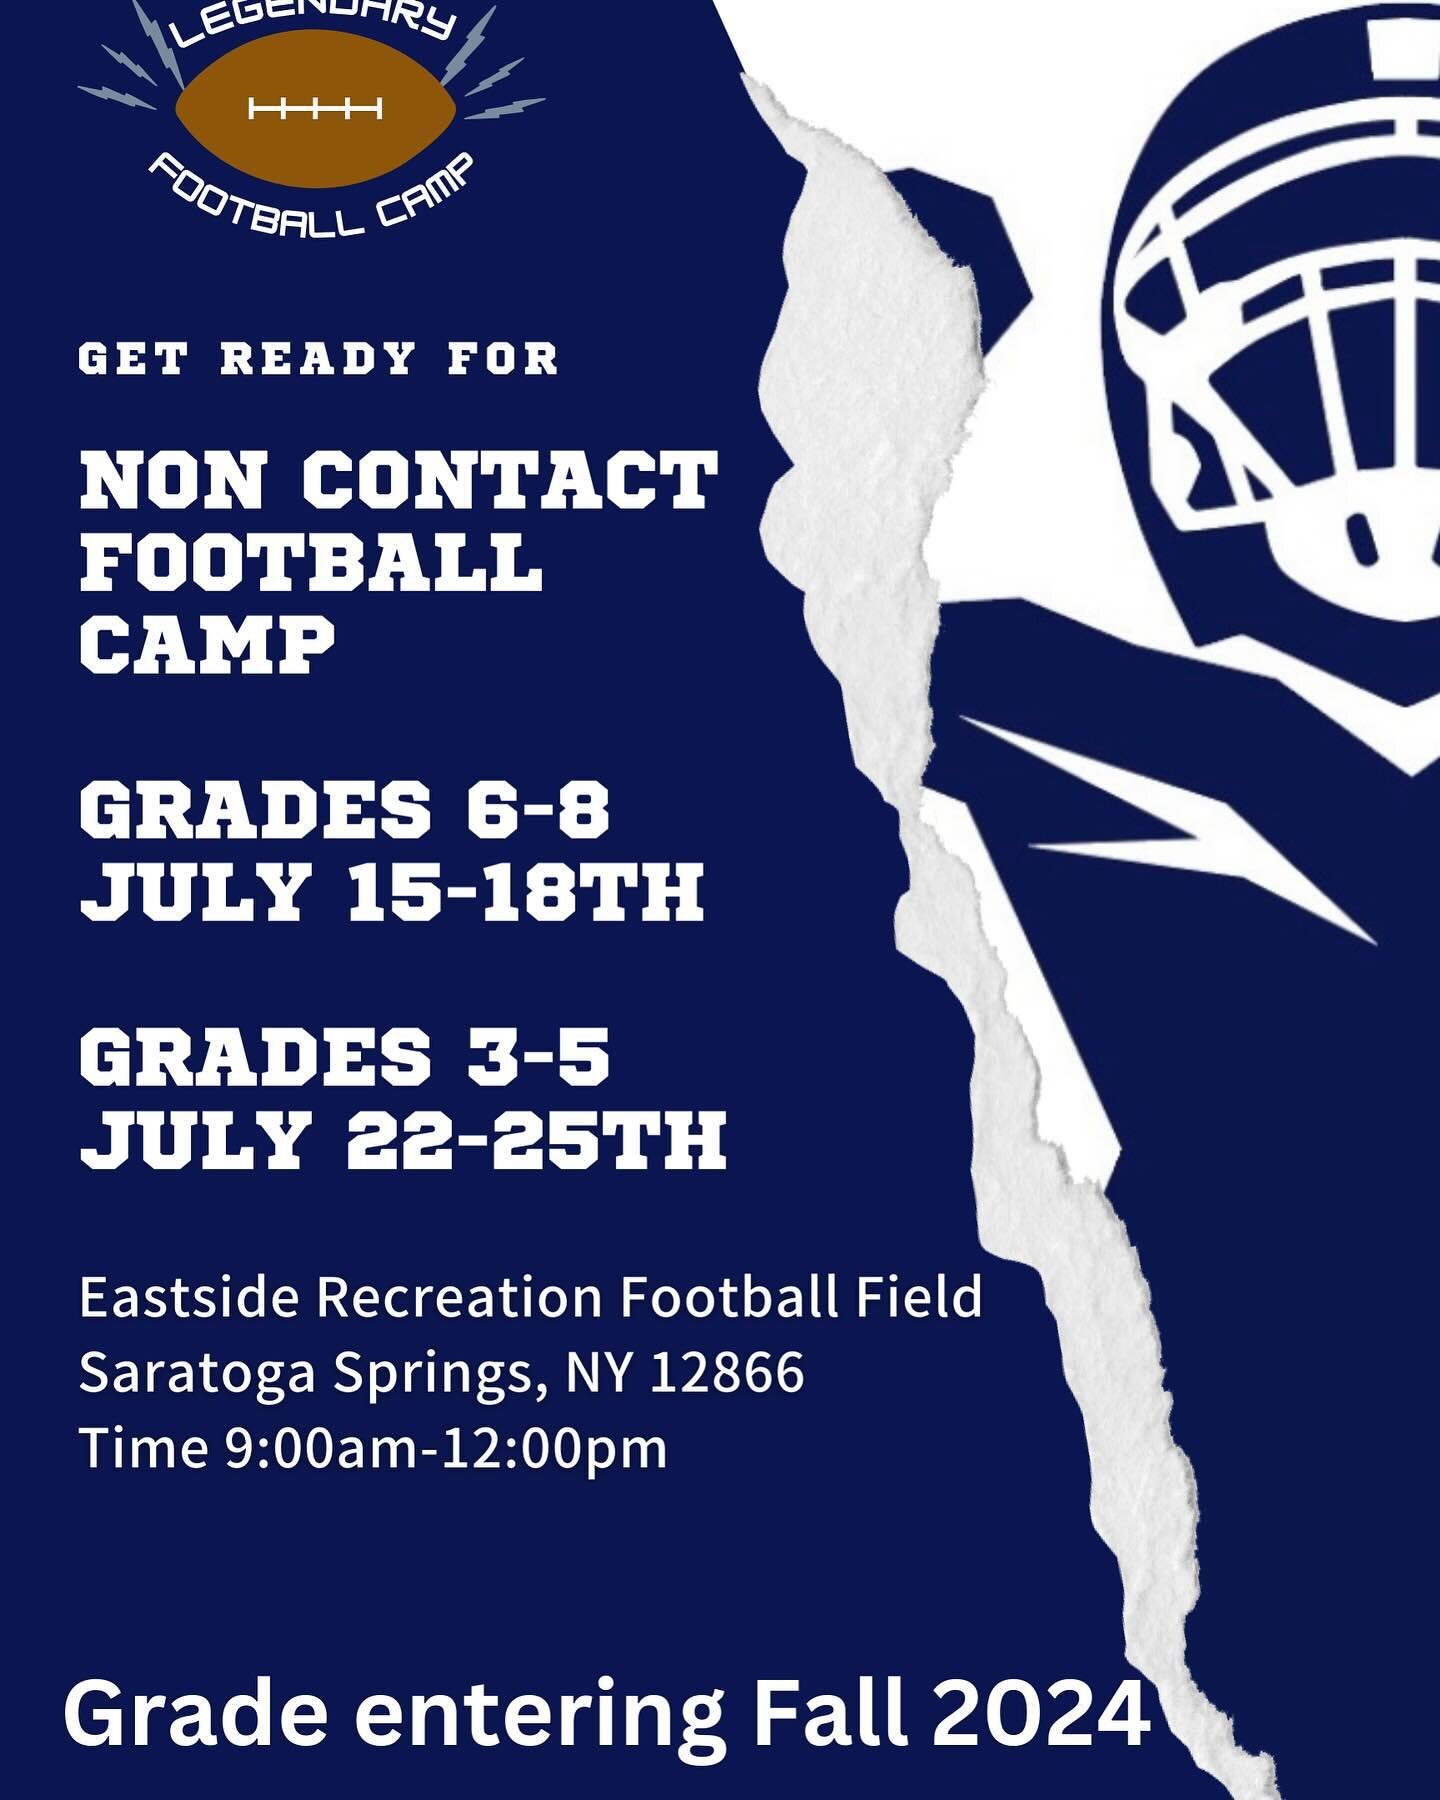 ANNOUNCEMENT: Youth Football Camps in July at Eastside Recreation Football Field in Saratoga Springs, NY 12866!
 Our experienced coaching staff will help each athlete learn the fundamentals of offense and defense while assisting them to develop their